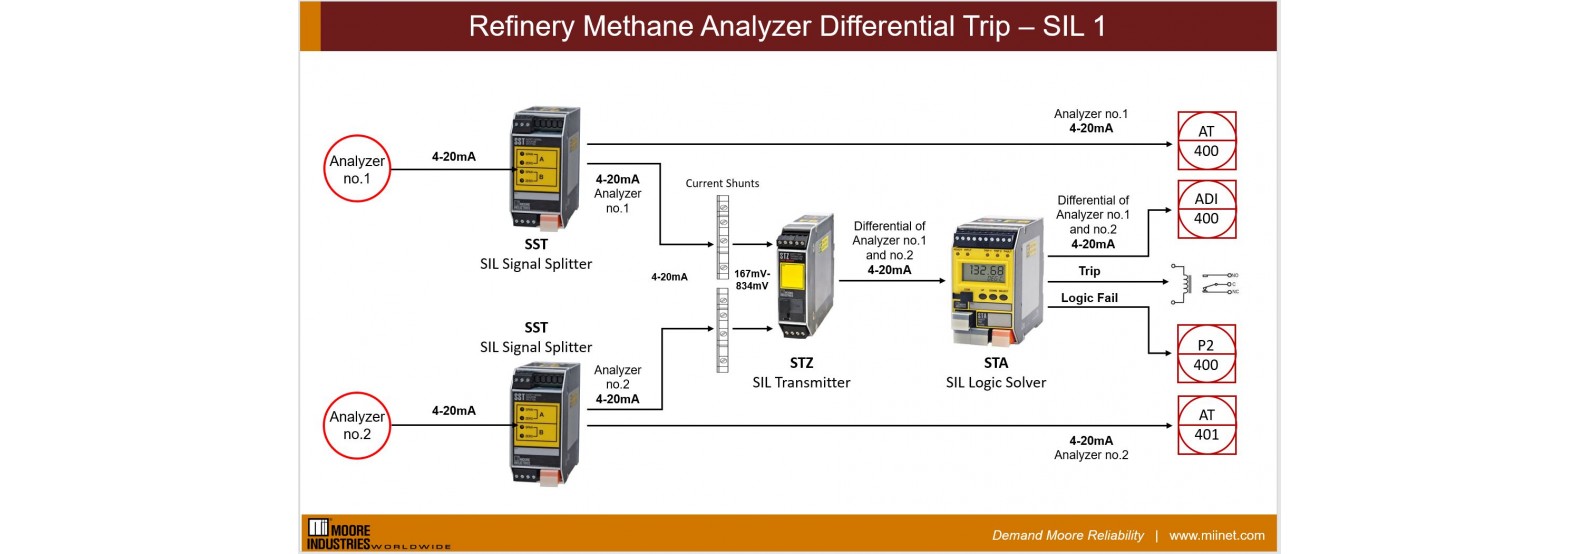 Moore Industries Refinery Methane Analyzer Differential Safety Trip